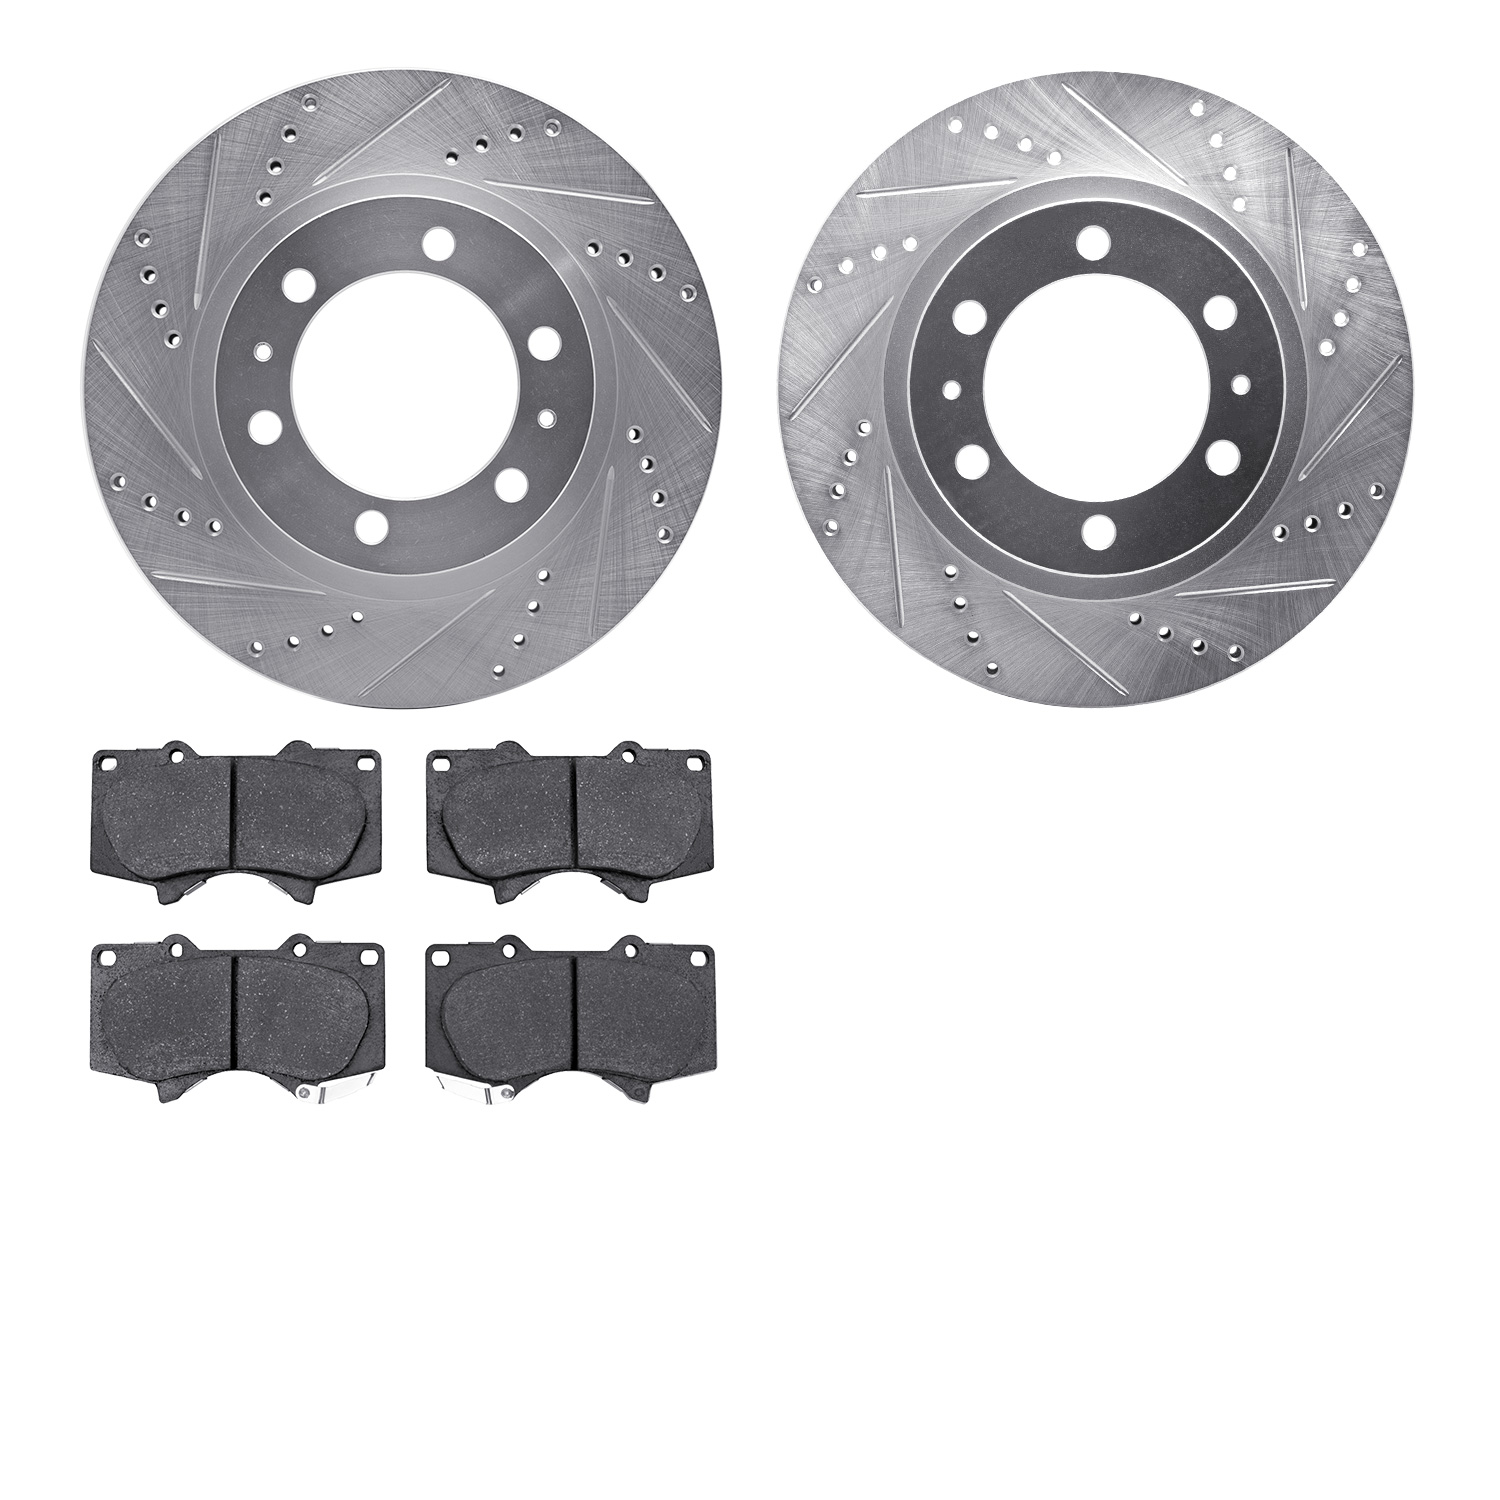 7402-76018 Drilled/Slotted Brake Rotors with Ultimate-Duty Brake Pads Kit [Silver], Fits Select Lexus/Toyota/Scion, Position: Fr